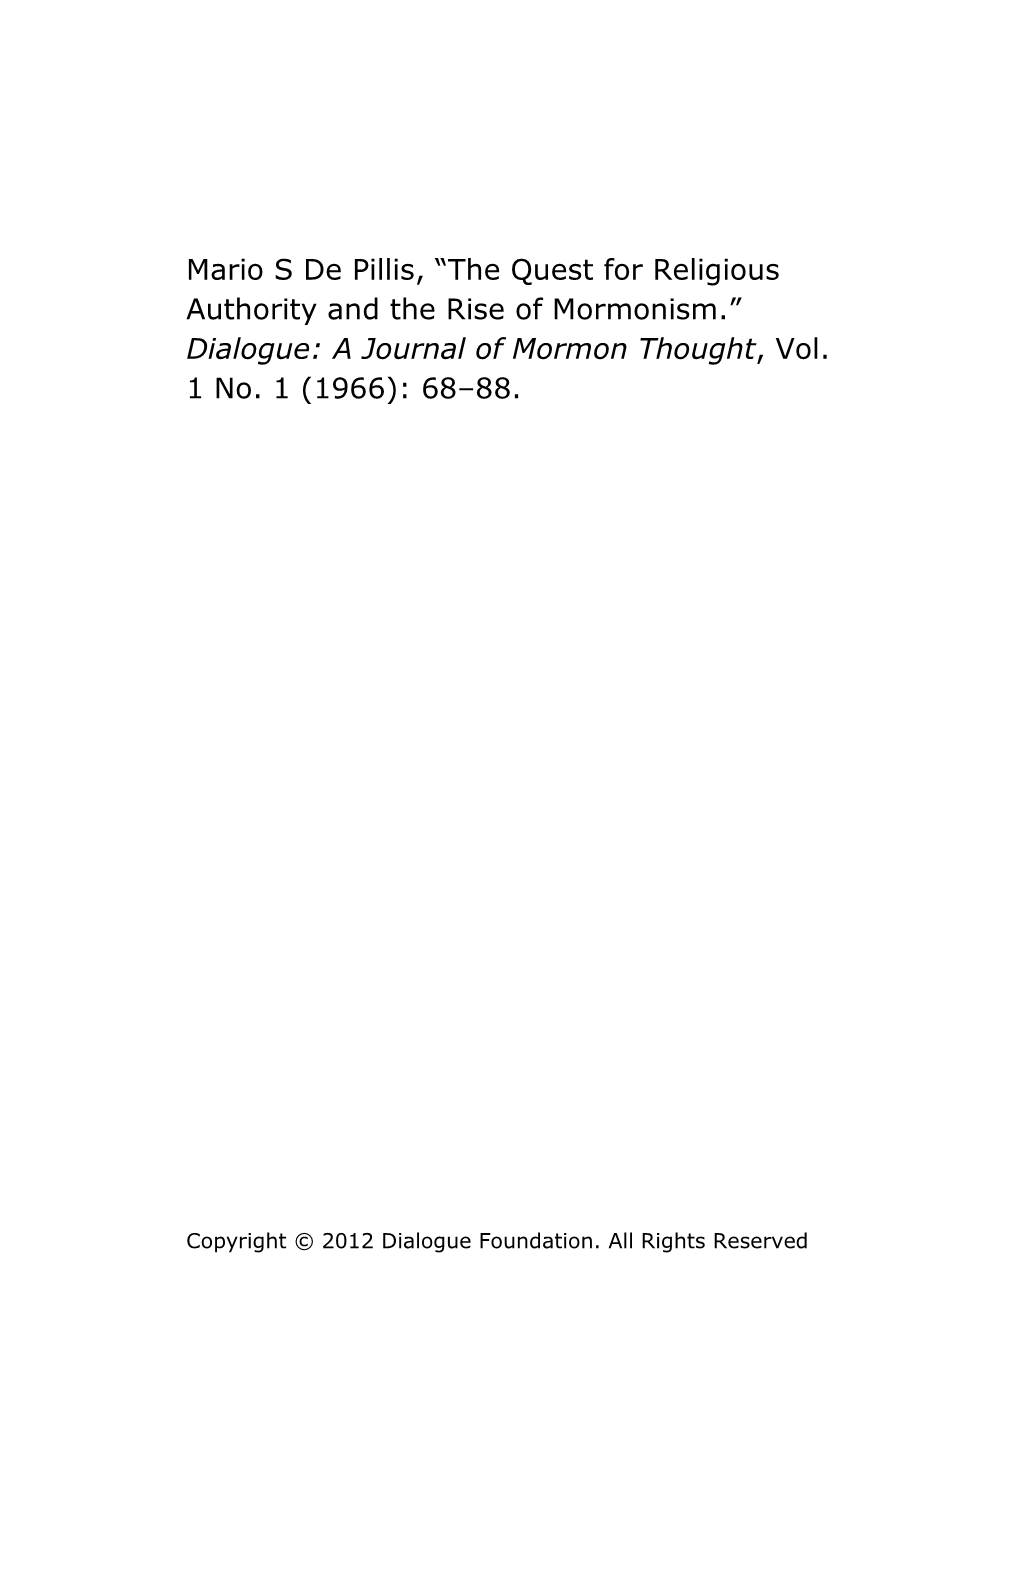 The Quest for Religious Authority and the Rise of Mormonism.” Dialogue: a Journal of Mormon Thought, Vol